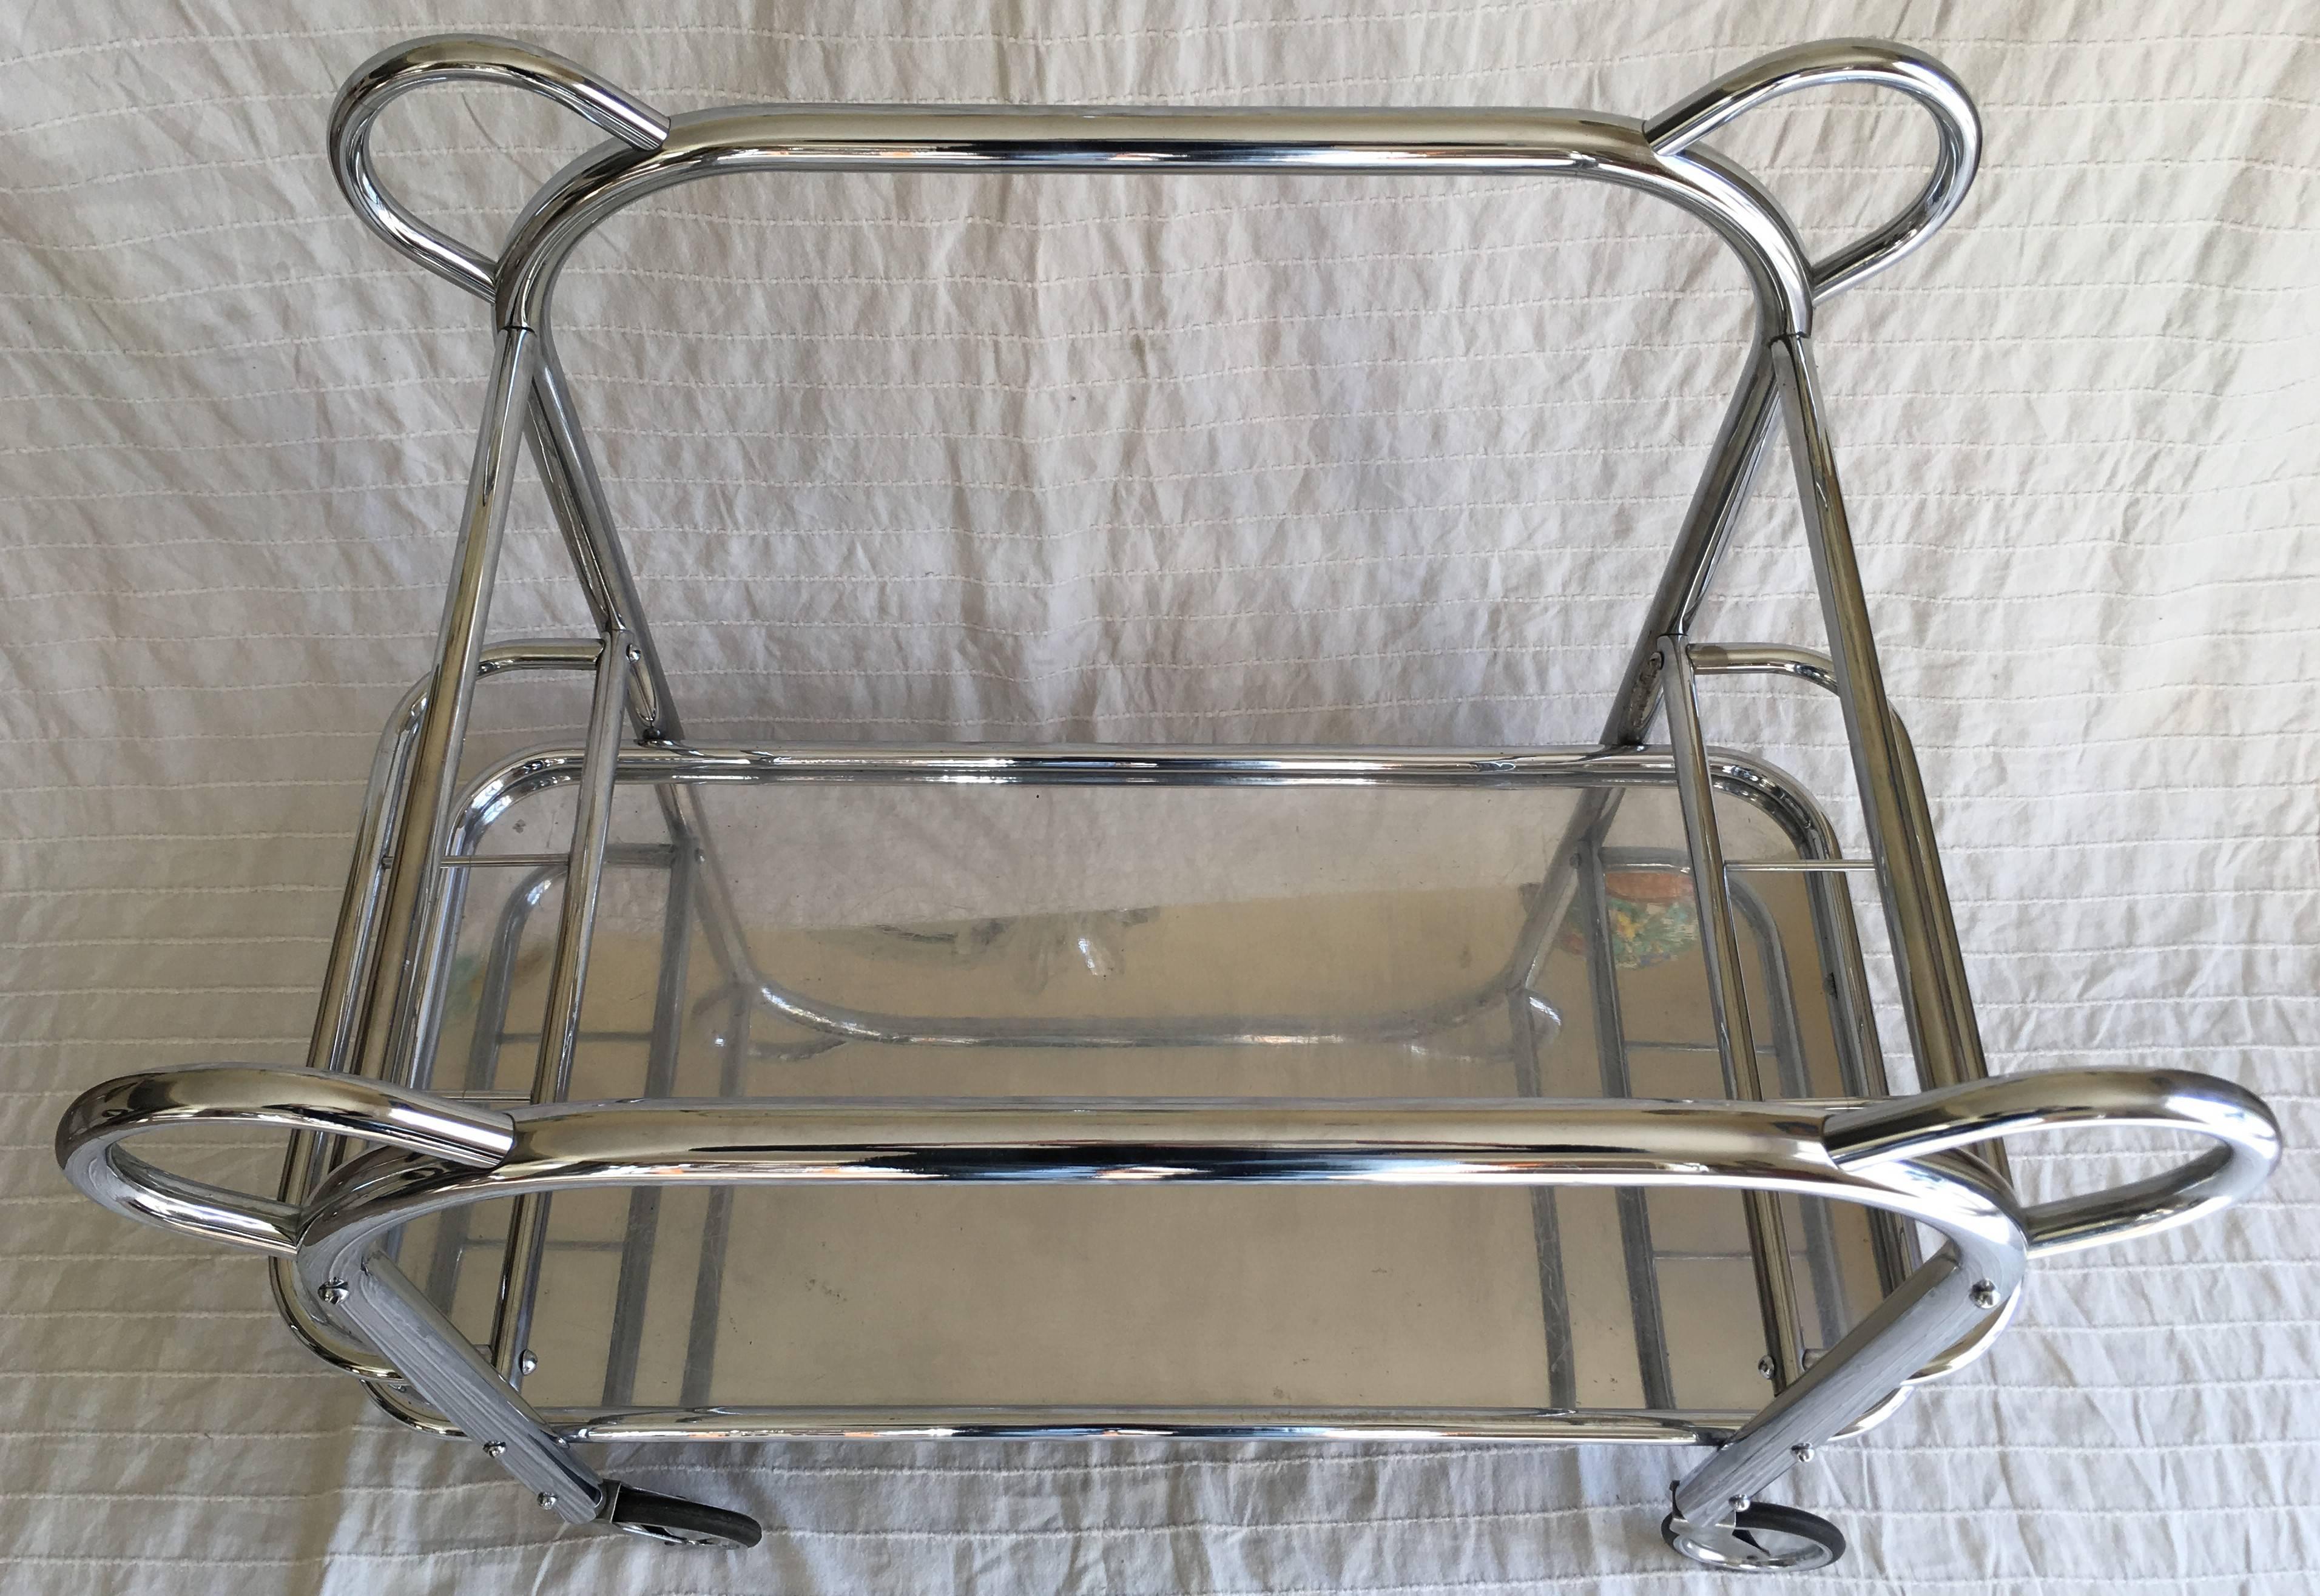 Aluminum Art Deco Chrome Plated Tubular Steel Bar Cart with a Removable Tray, Marked For Sale